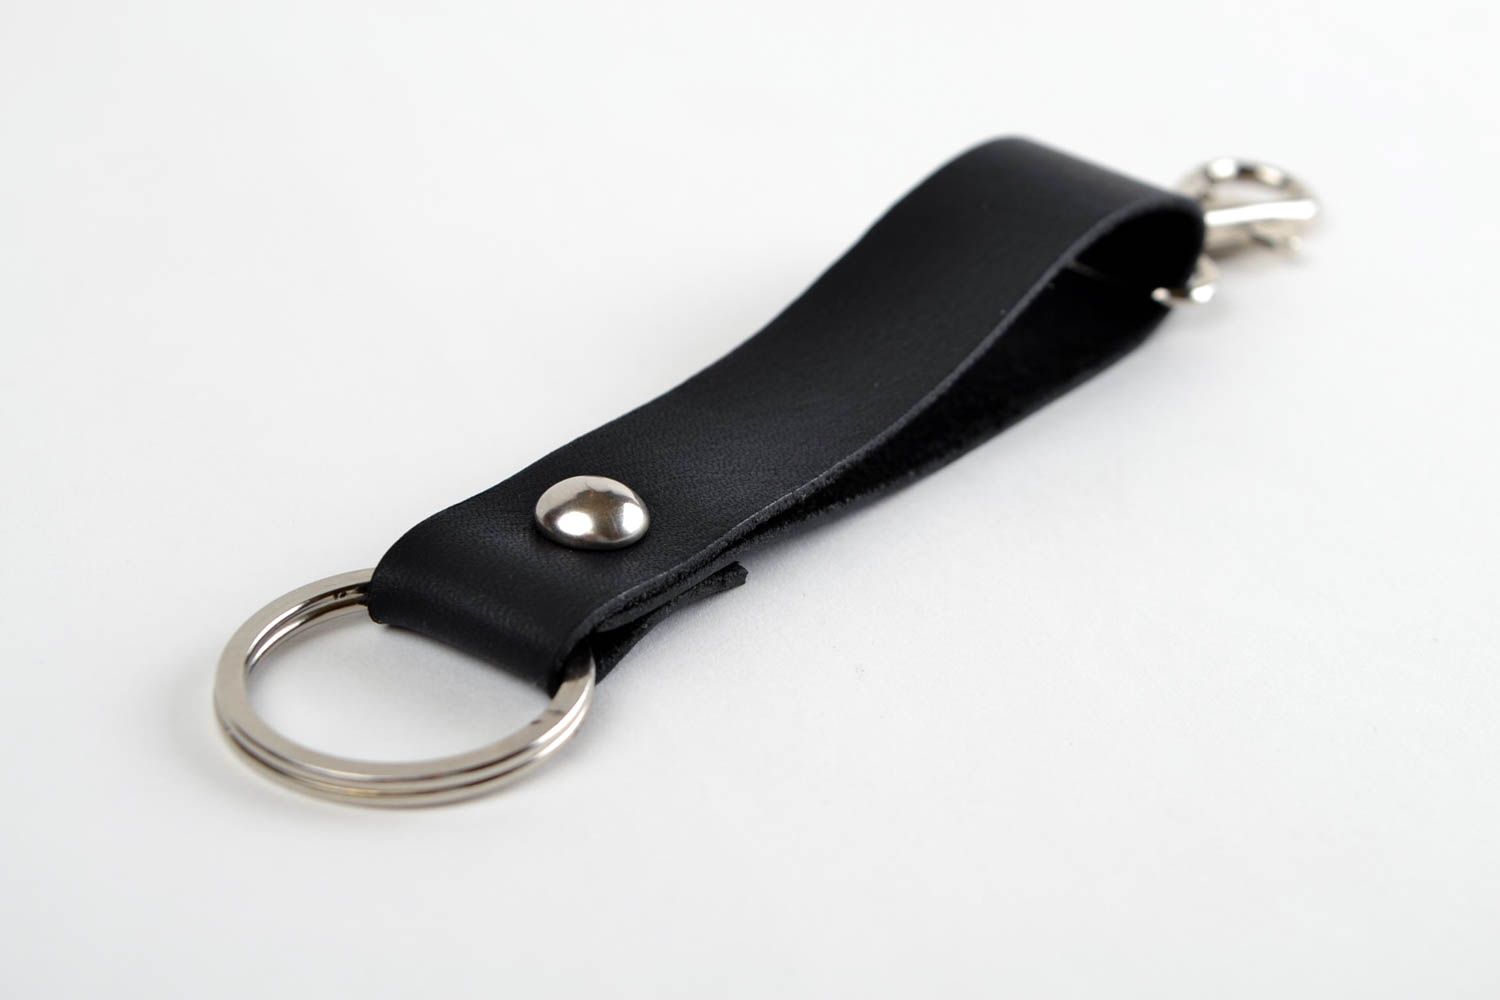 Handmade keychain leather key chain leather key fob leather goods gifts for men photo 3